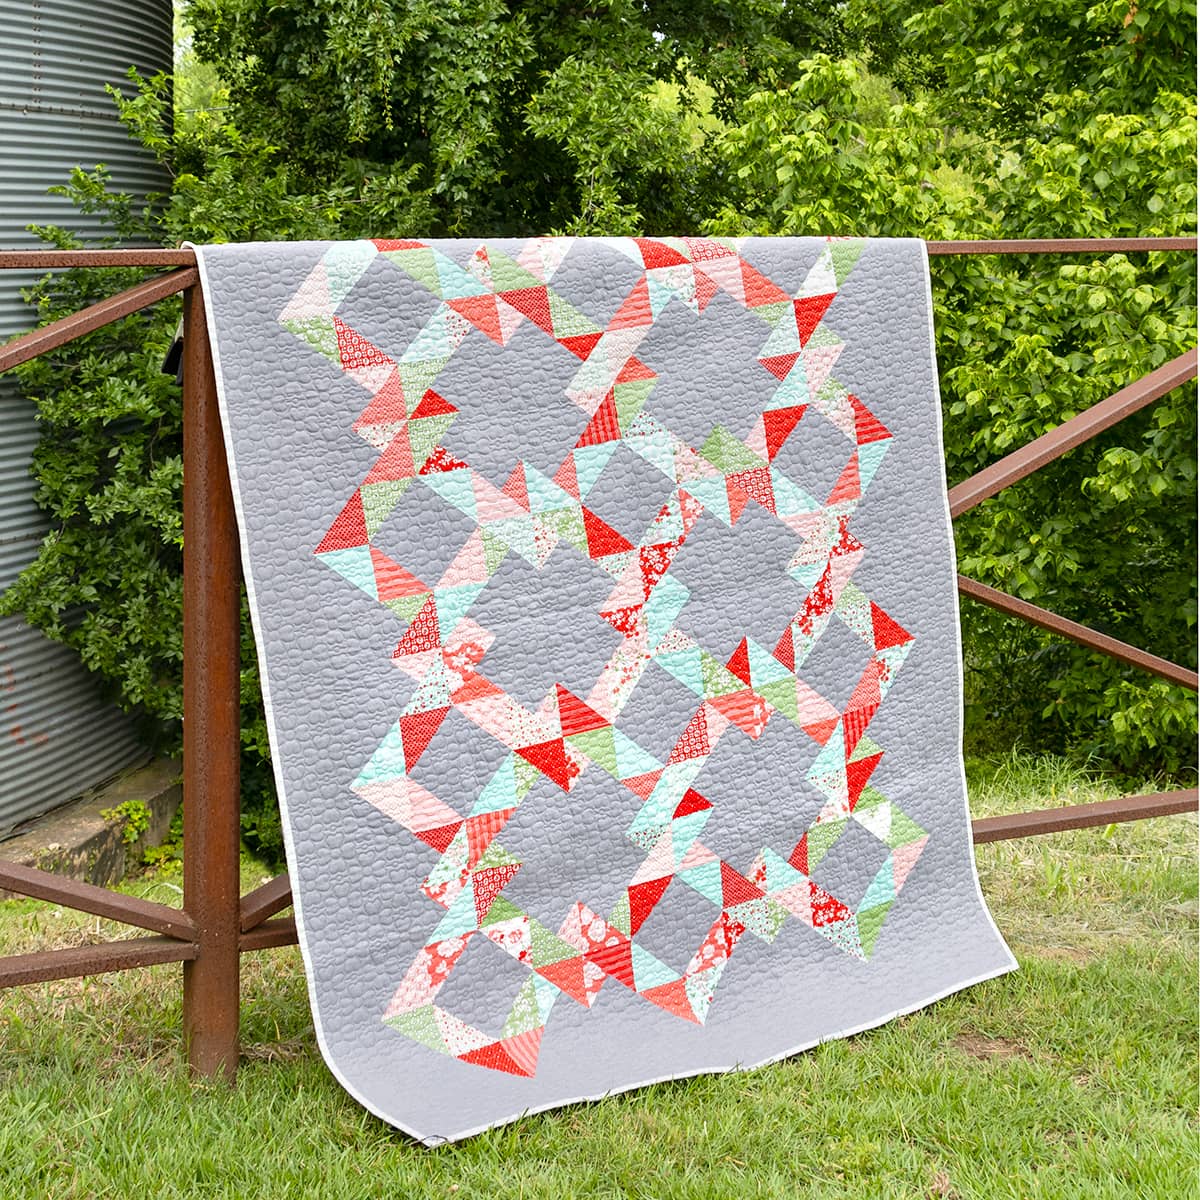 10 Quilting Techniques Every Quilter Should Master